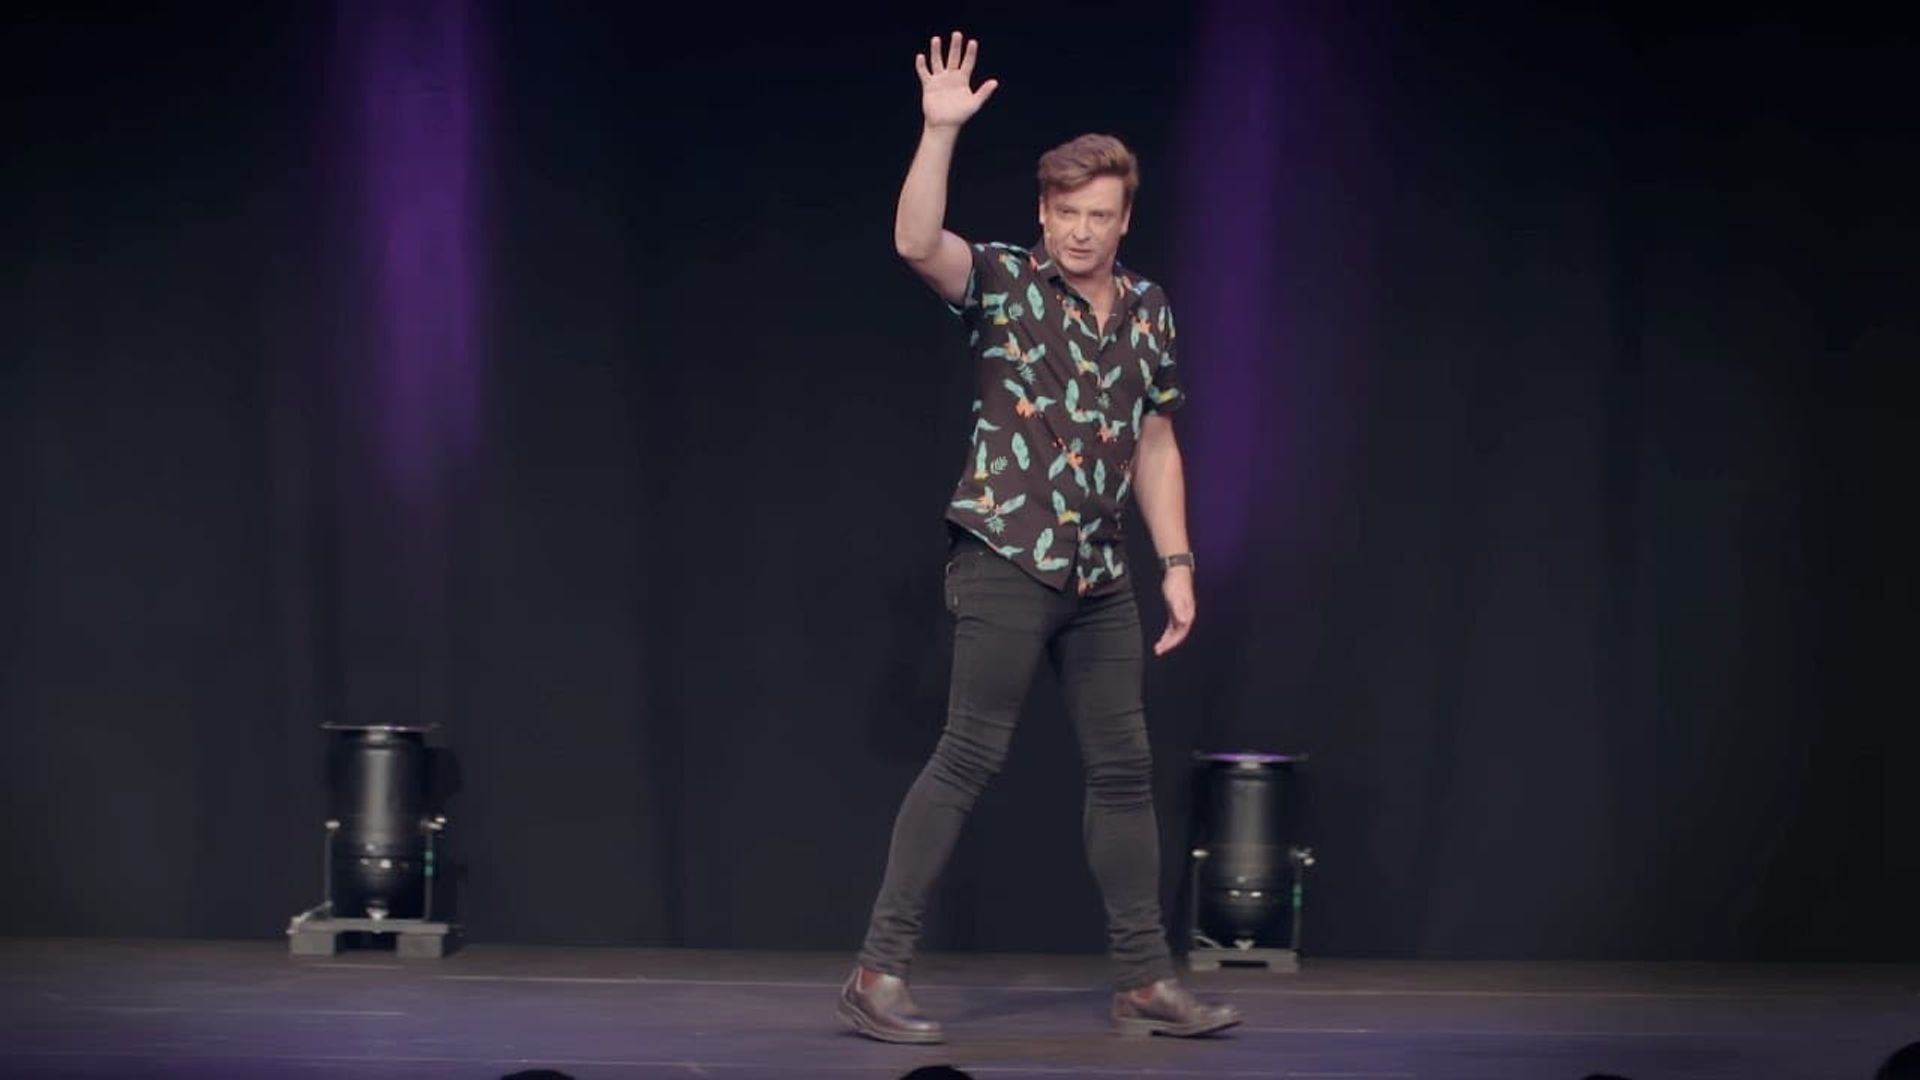 Rhys Darby: I'm a Fighter Jet background